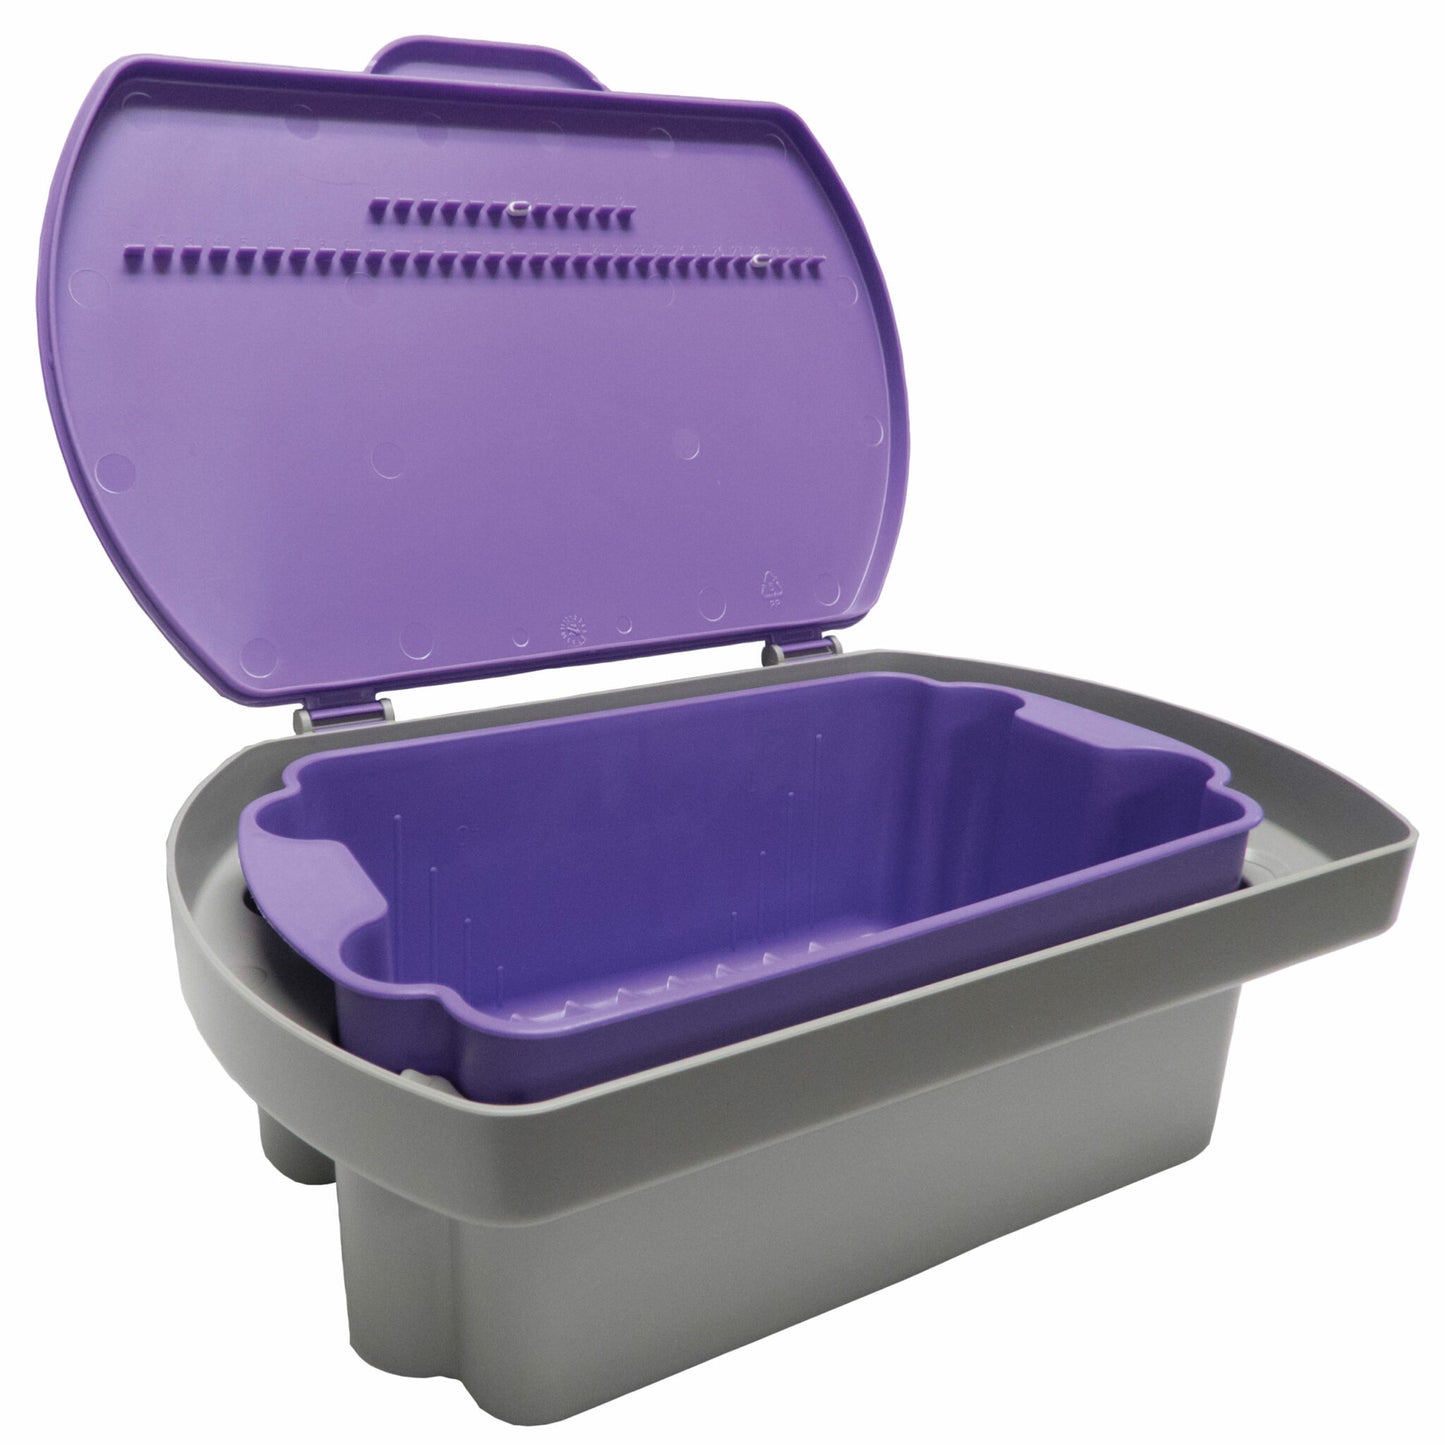 SANI HLD Covered Holder with Tray